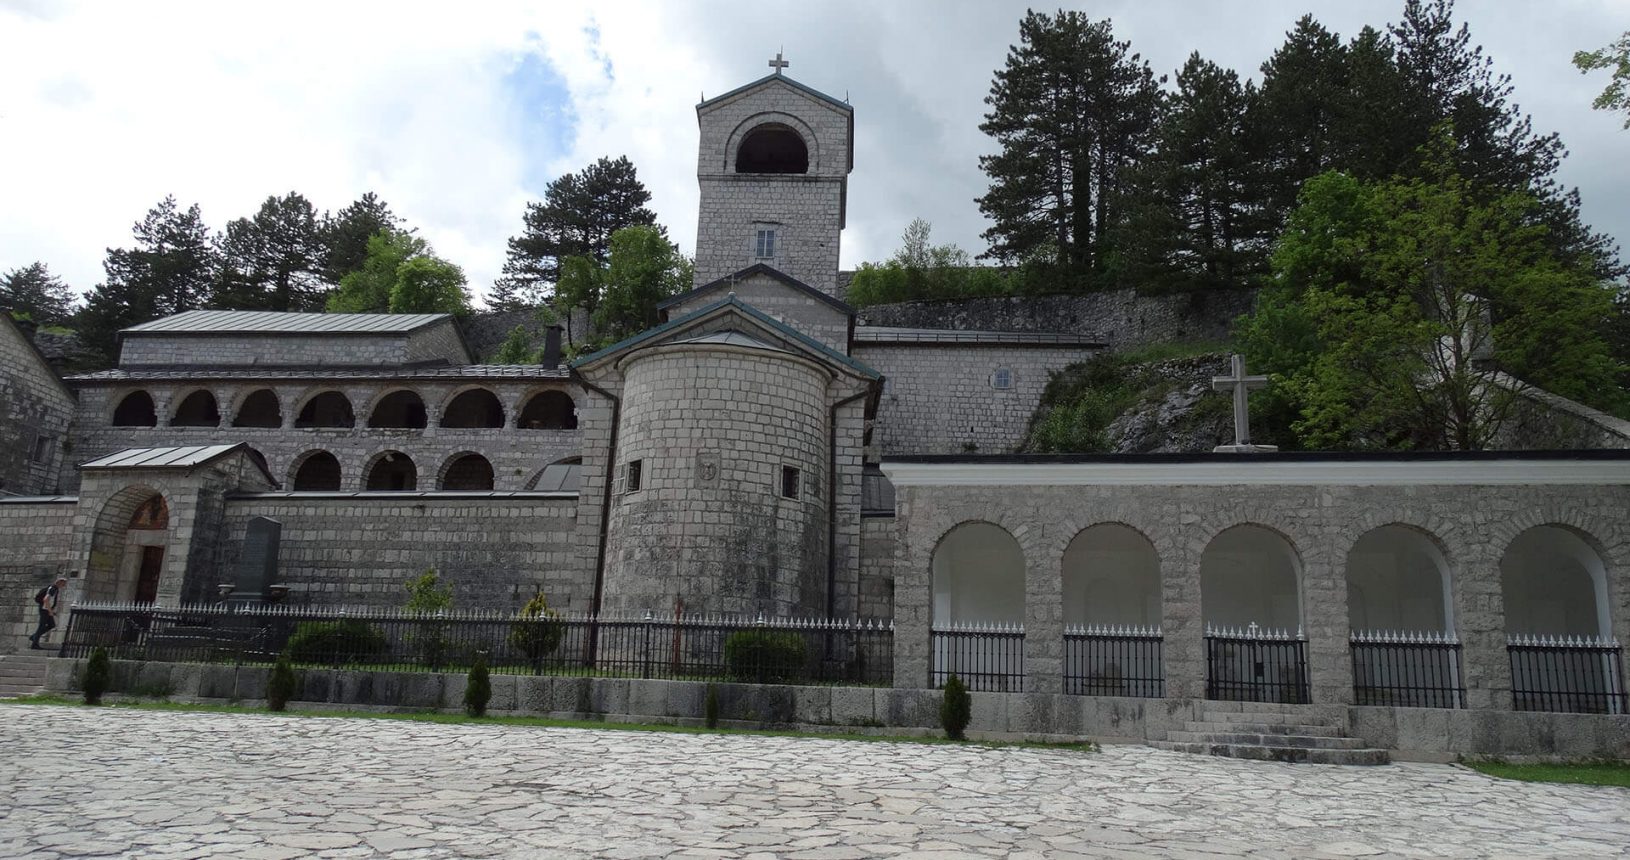 The emost important attraction in Cetinje